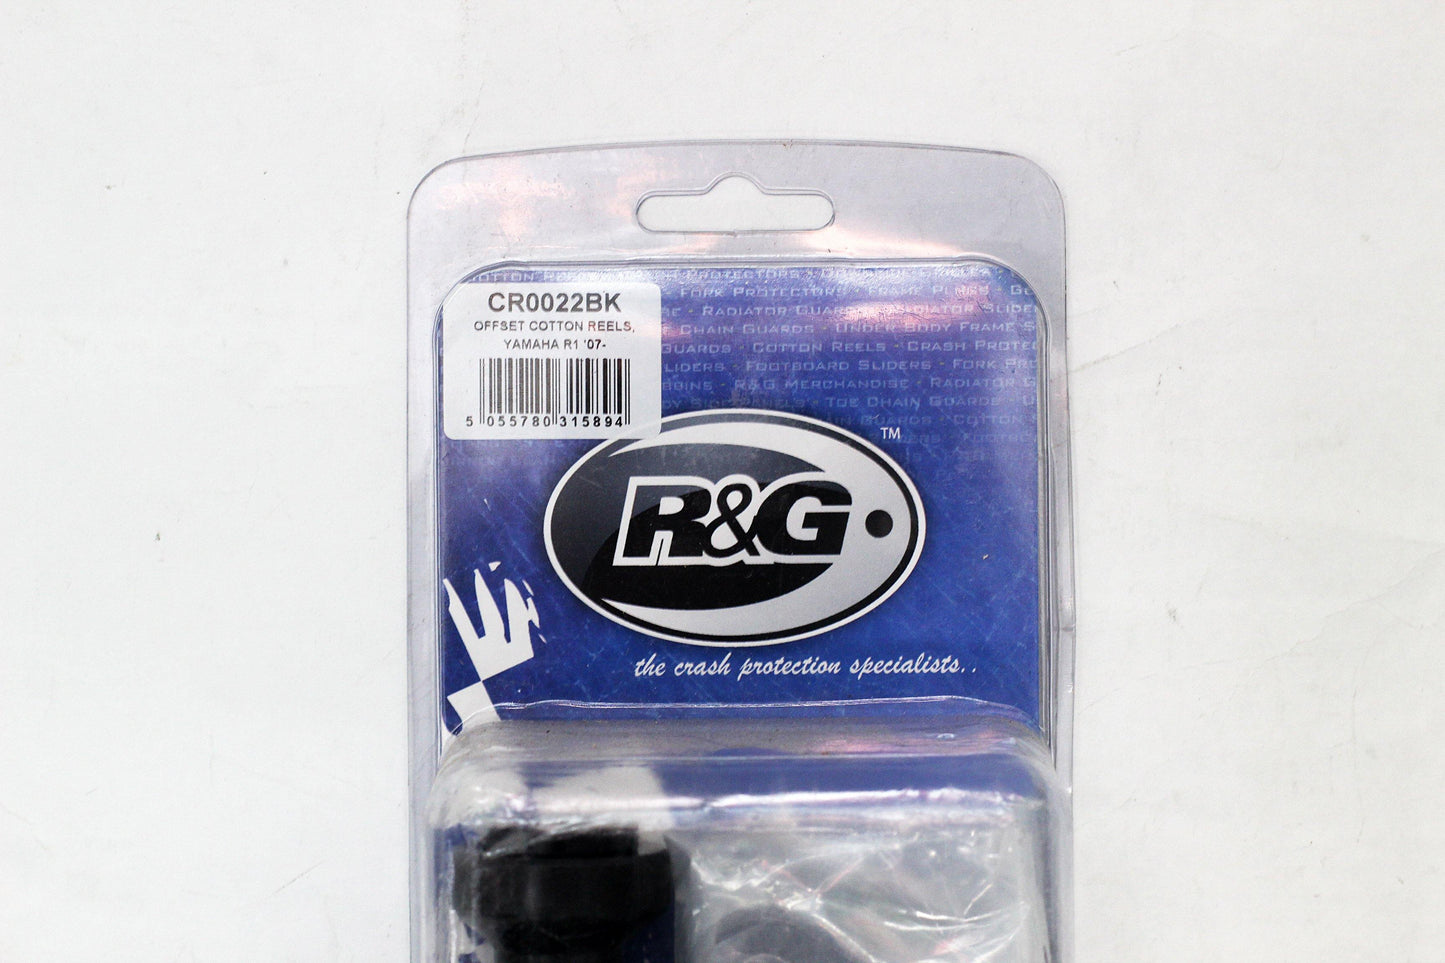 R&G Cotton Reels (Offset) fits for Yamaha YZF-R1 ('07-) / MT-10 ('16-) Models - Durian Bikers